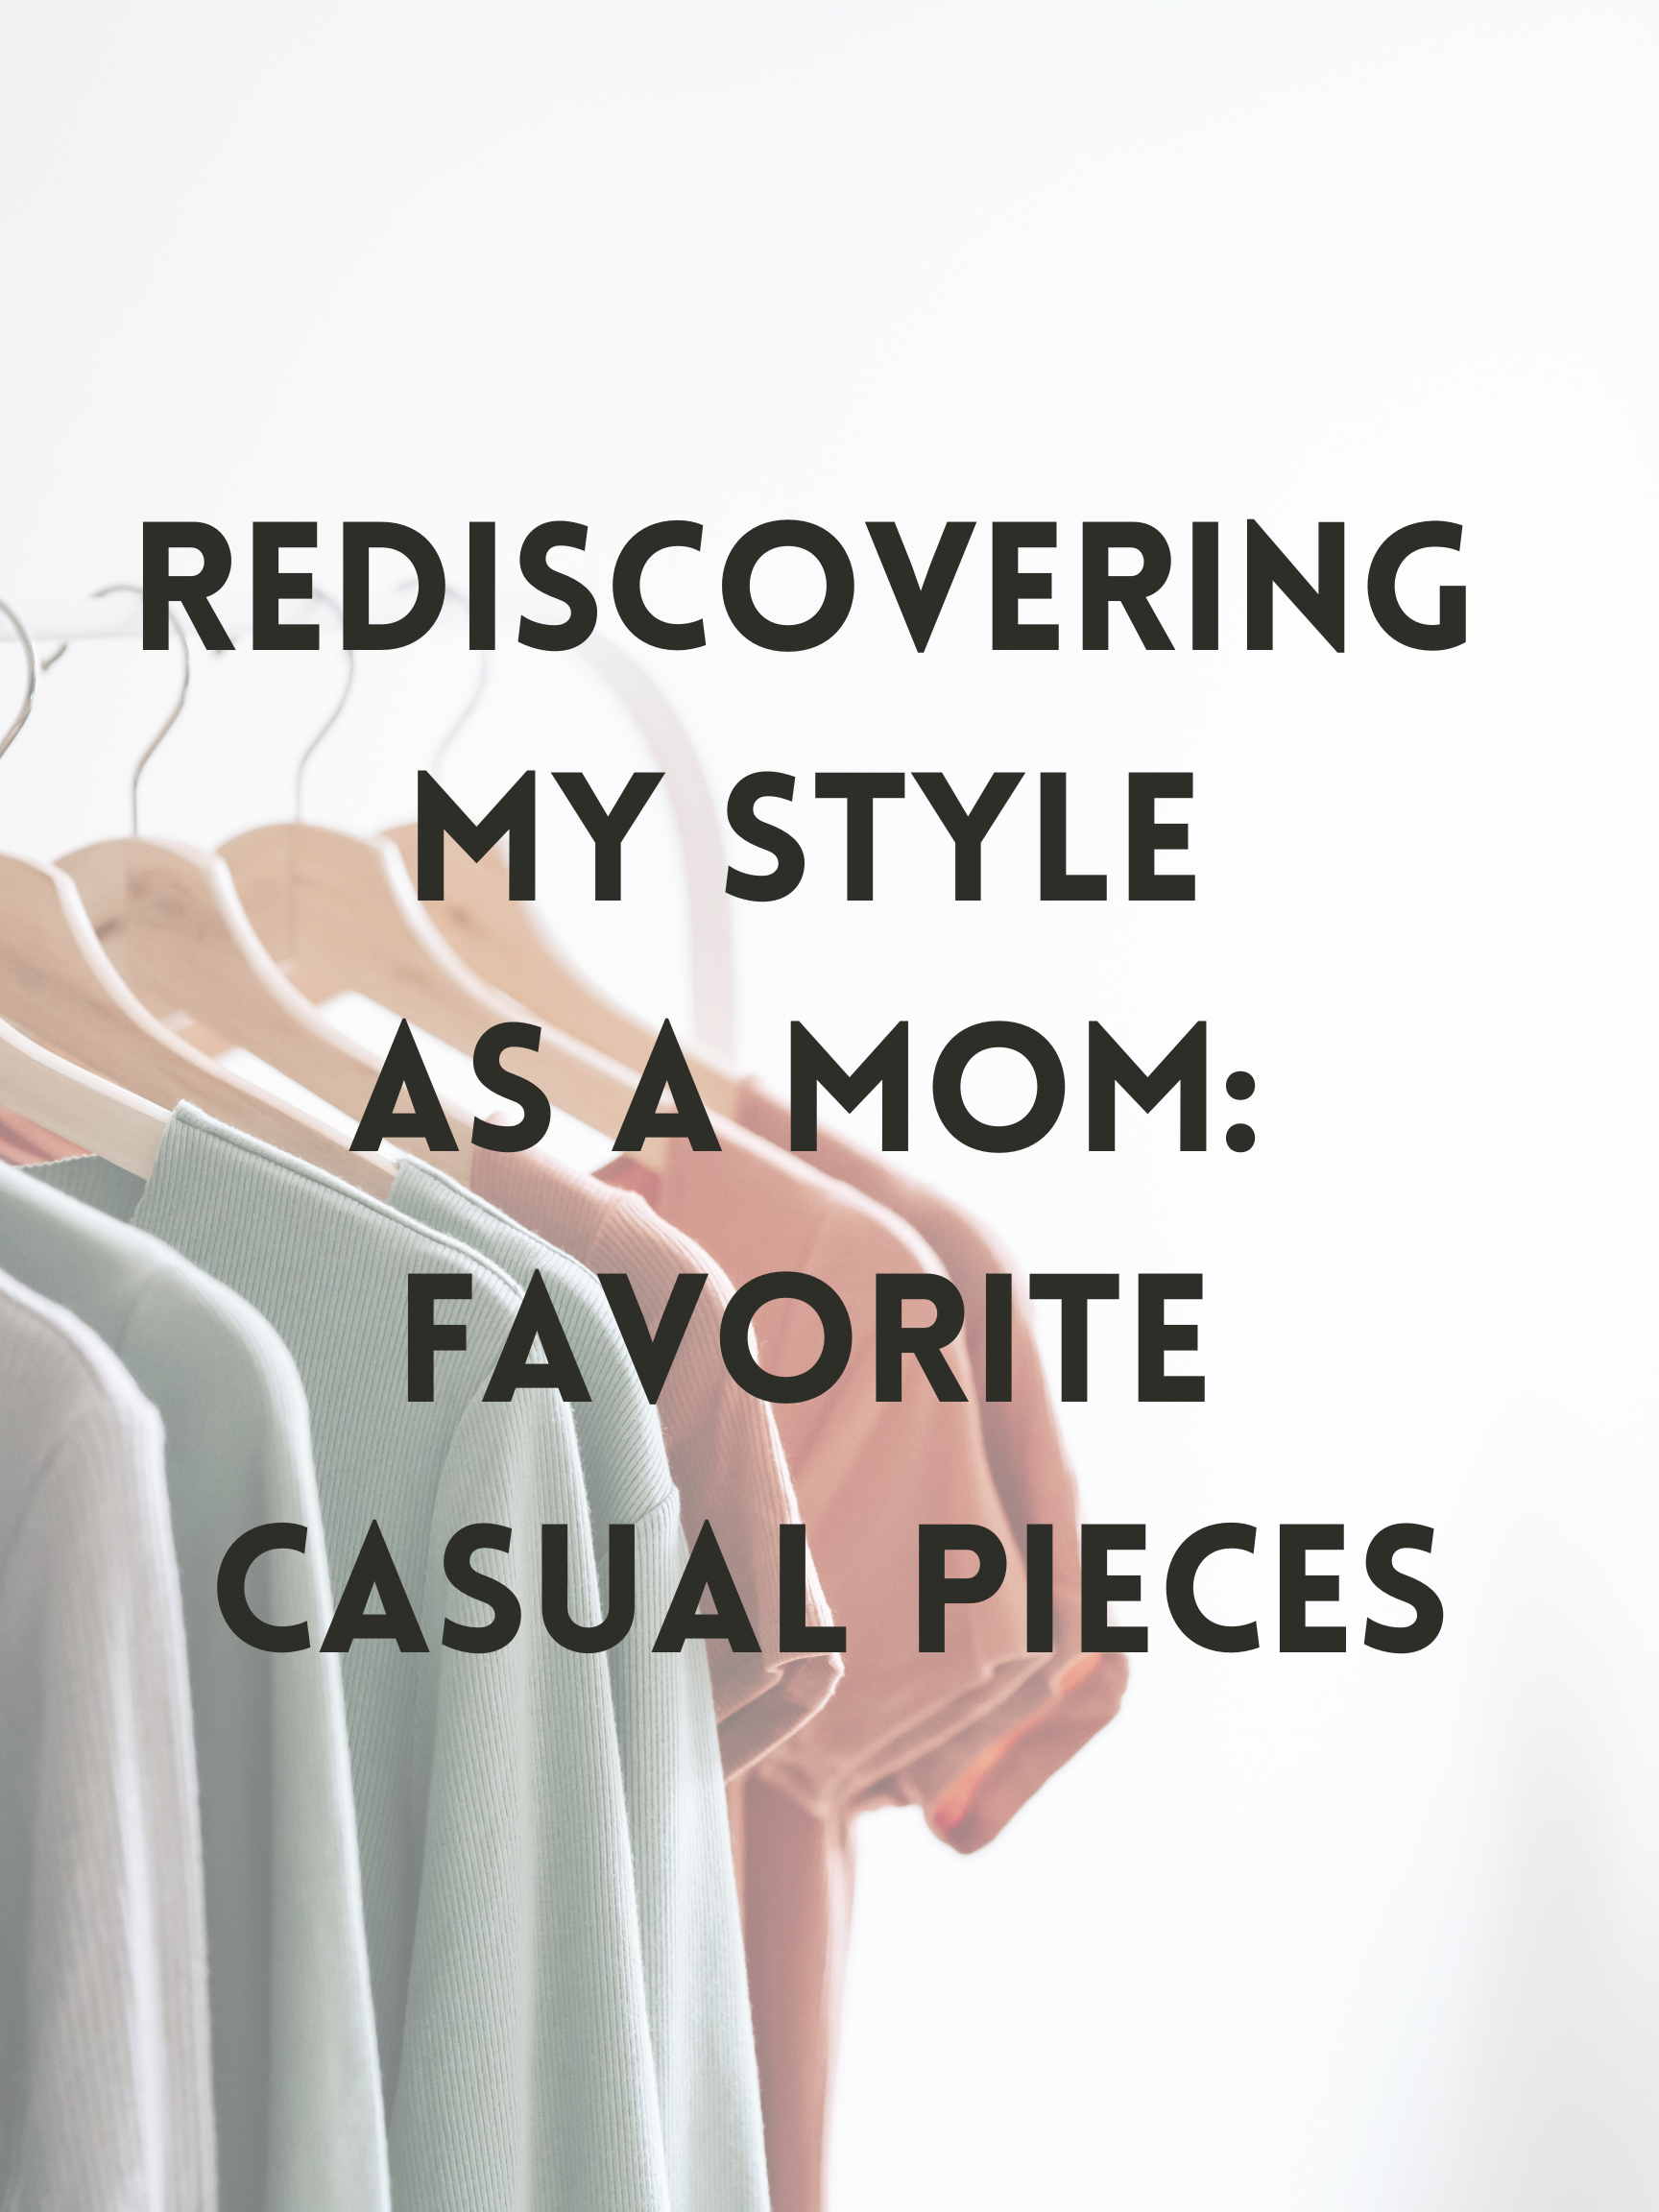 Rediscovering my Style as a Mom: Favorite Pieces